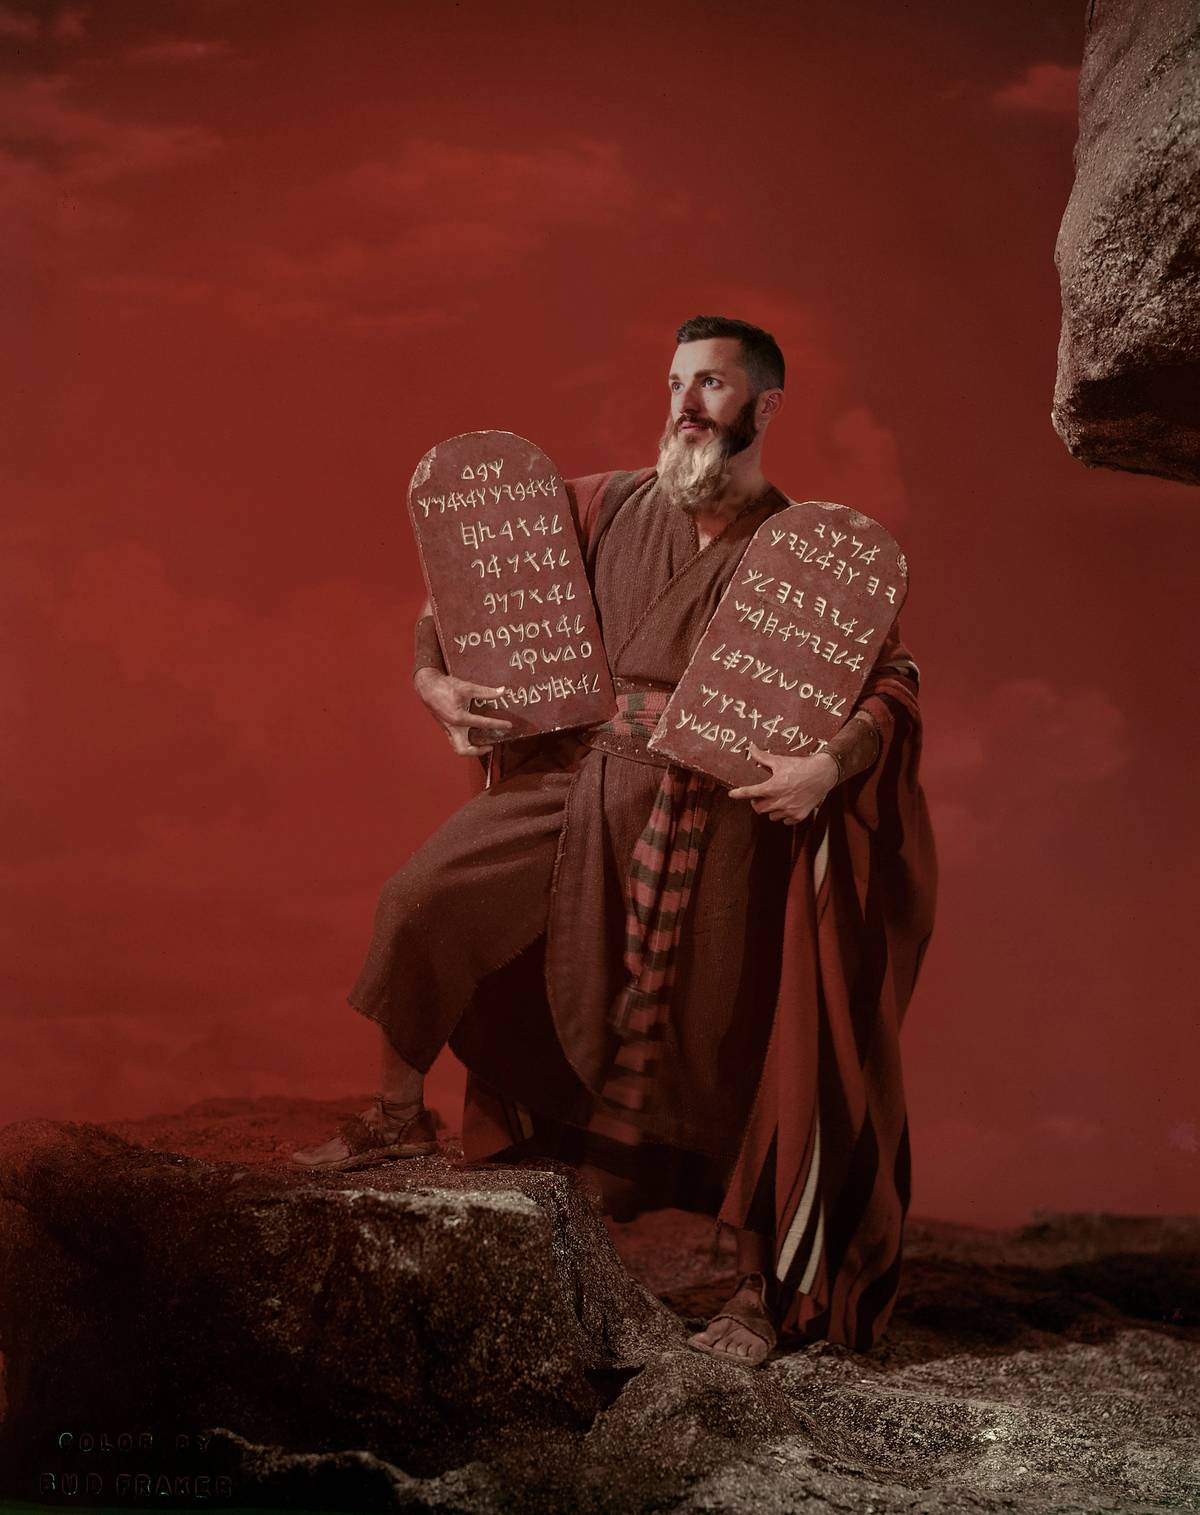 Steven x Moses. ‘The Ten Commandments,’ was Cecil B. DeMille’s last and most successful work of epic religious filmmaking, grossing, in today’s terms, over a billion dollars, and earning awards for Charlton Heston in the lead role. The painter Arnold Friberg designed Moses’ distinctive rust-and-black-striped robe—handwoven by Dorothea Hulse, one of the world’s finest weavers—without knowing that those are the colors of the Tribe of Levi. After the production, DeMille gave Moses’ robe to Friberg as a gift.